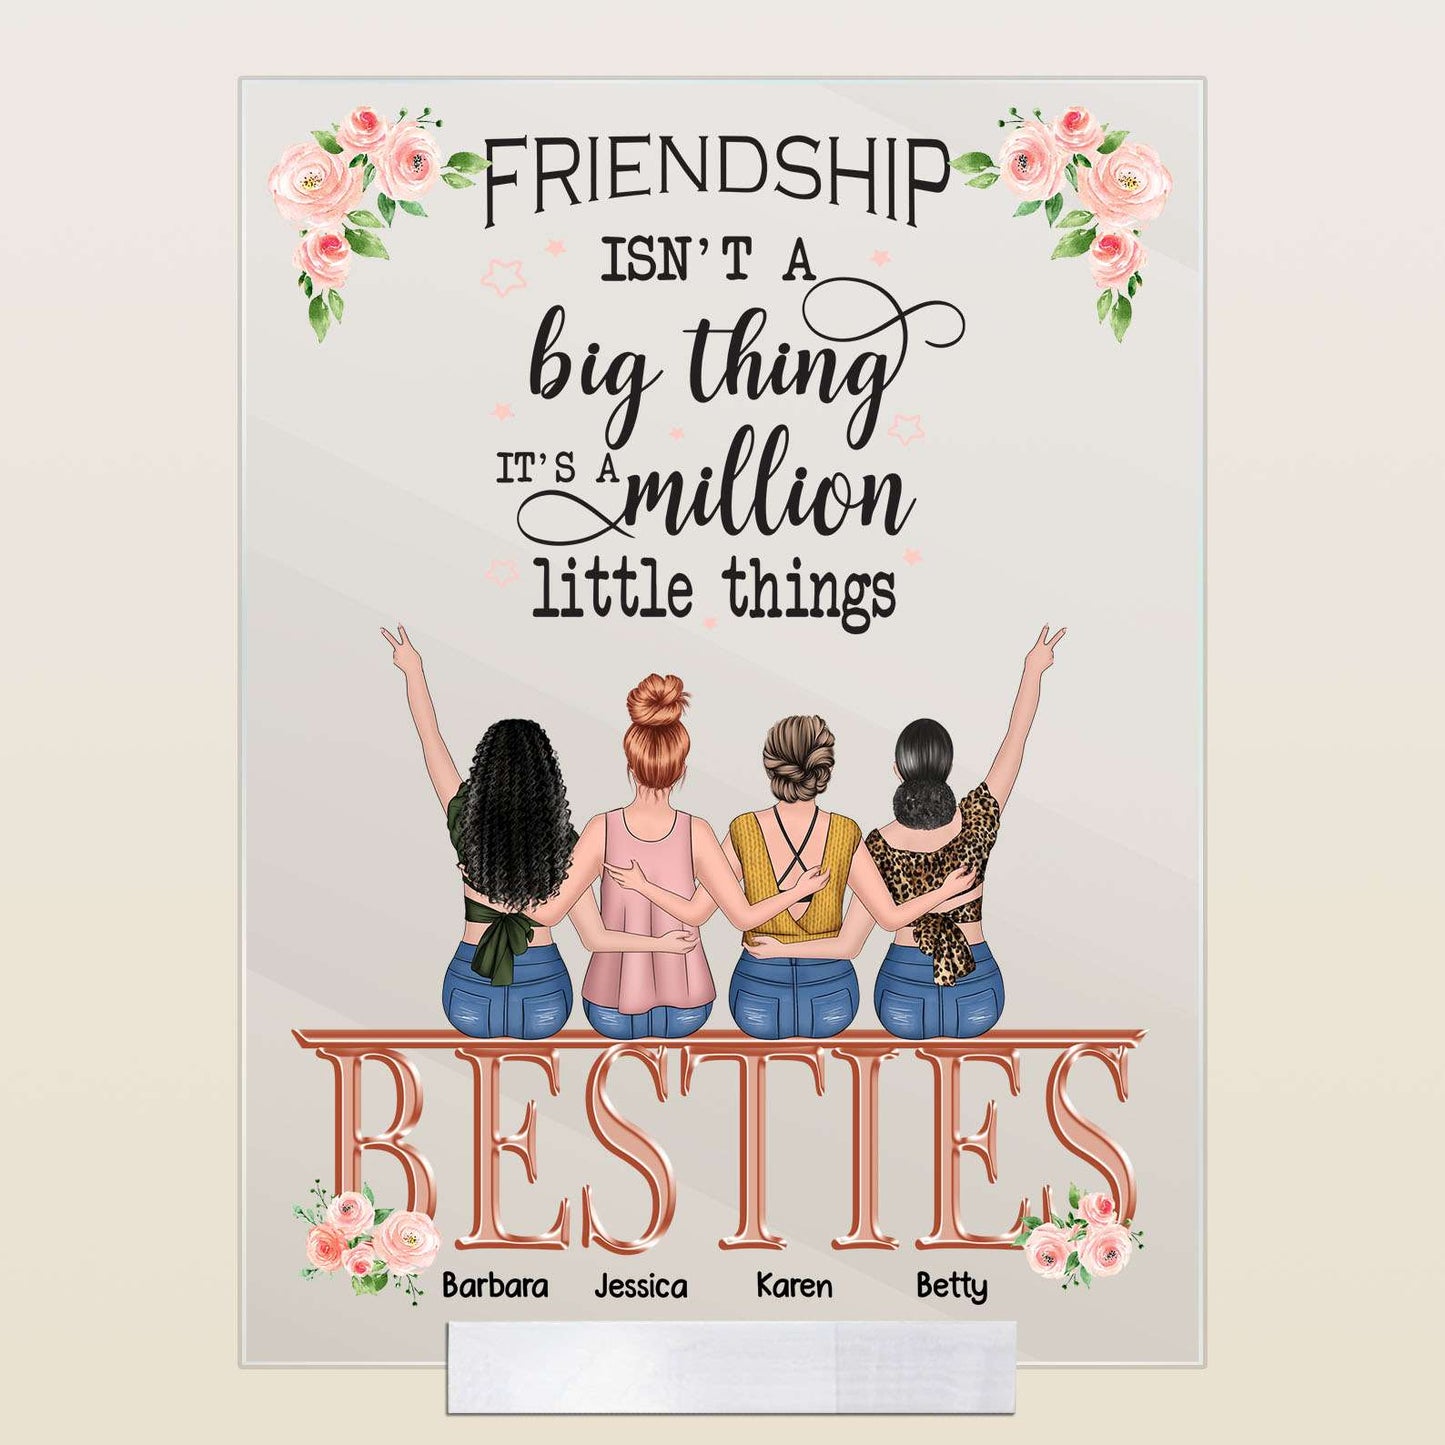 Friendship Isn't A Big Thing It's A Million Little Things - Personalized Acrylic Plaque - Birthday Missing Gift For Besties, BFF, Best Friends